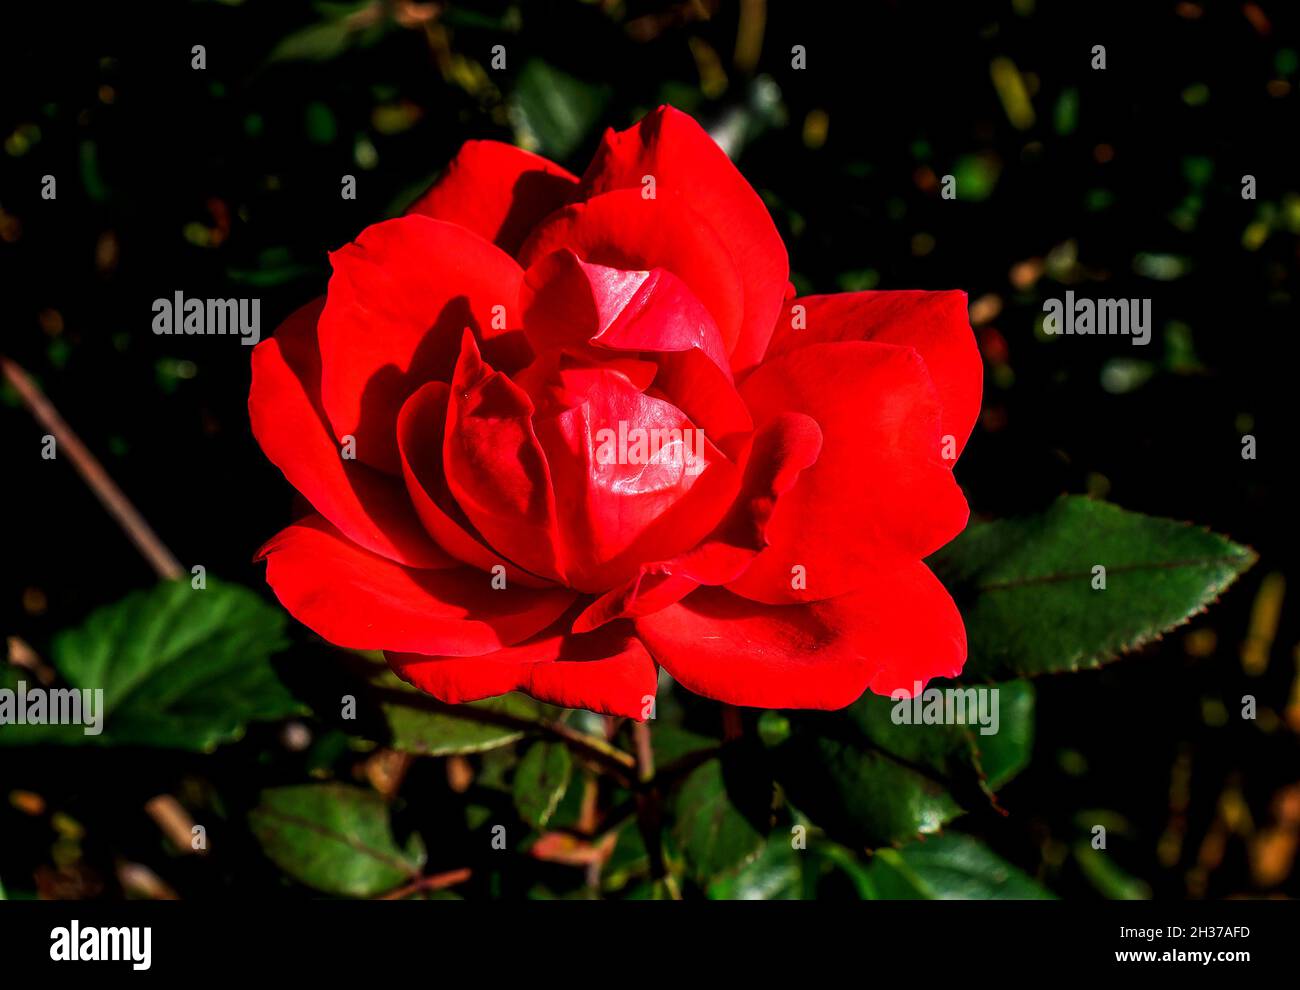 Scarlet red rose in Autumn bloom Stock Photo